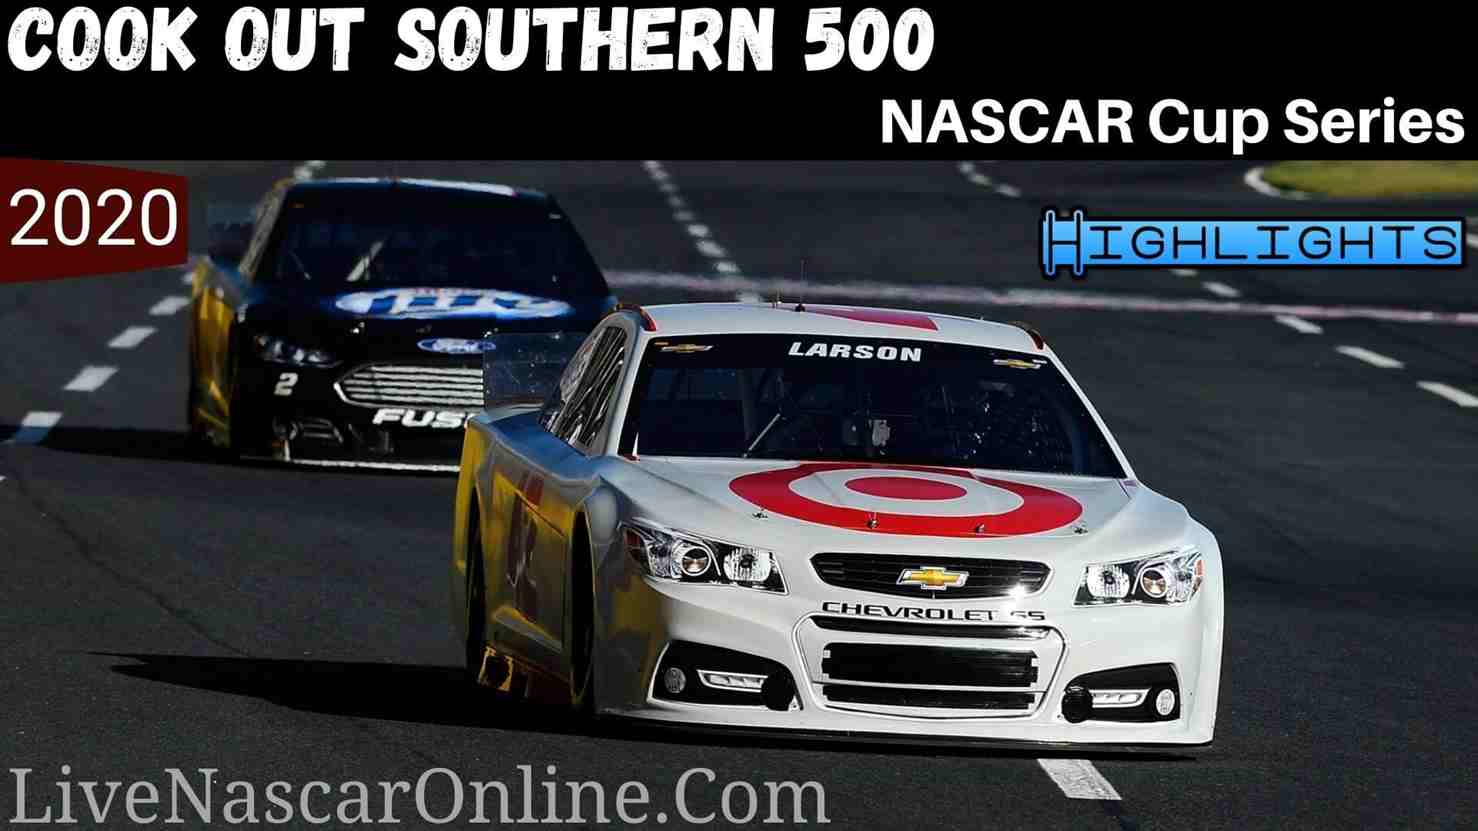 Cook Out SOUTHERN 500 Nascar Cup Series Highlights 2020